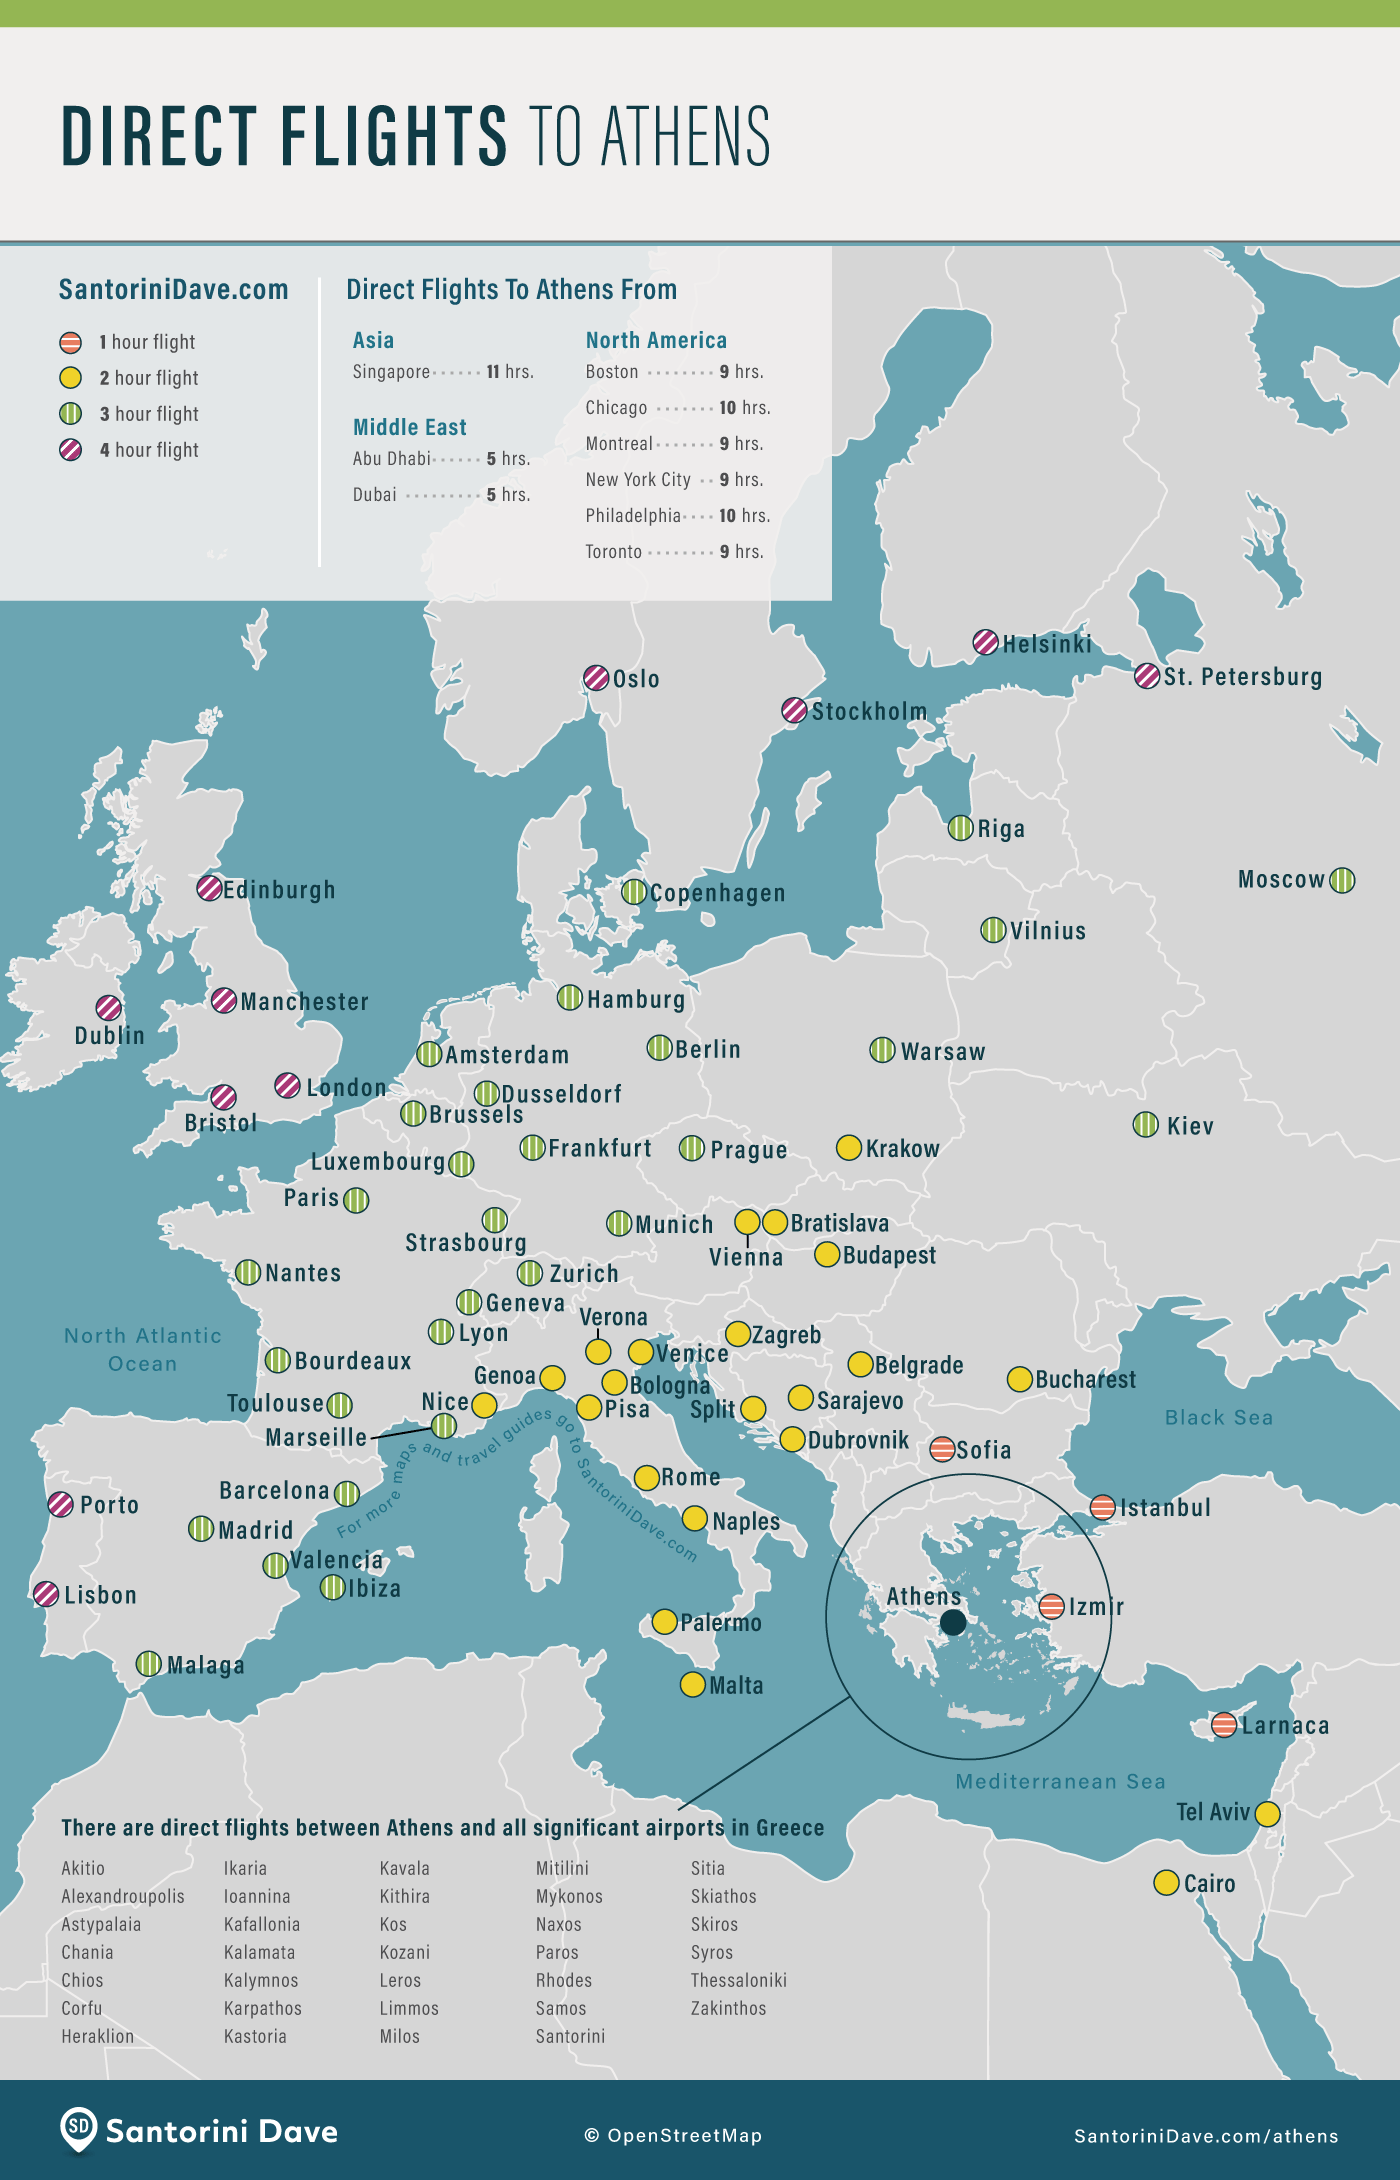 Map of direct flights to Athens, Greece